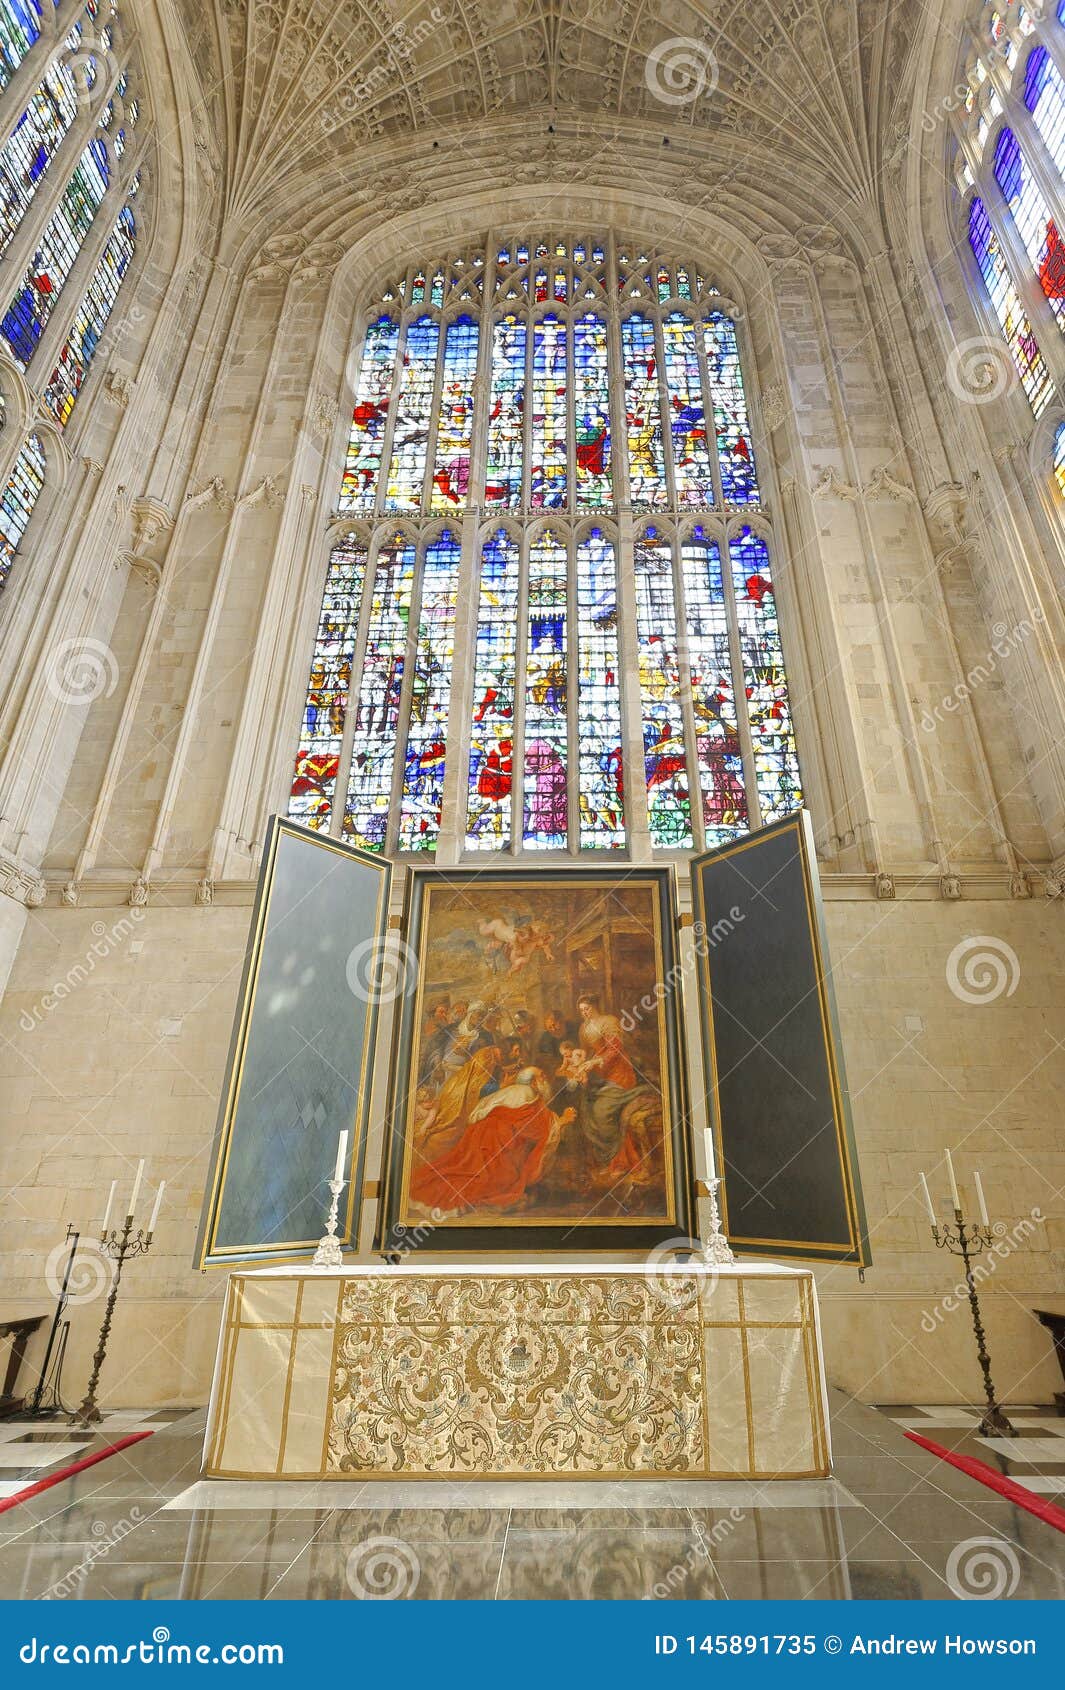 Gothic Ceiling Kings College Chapel Masterpiece Editorial Image